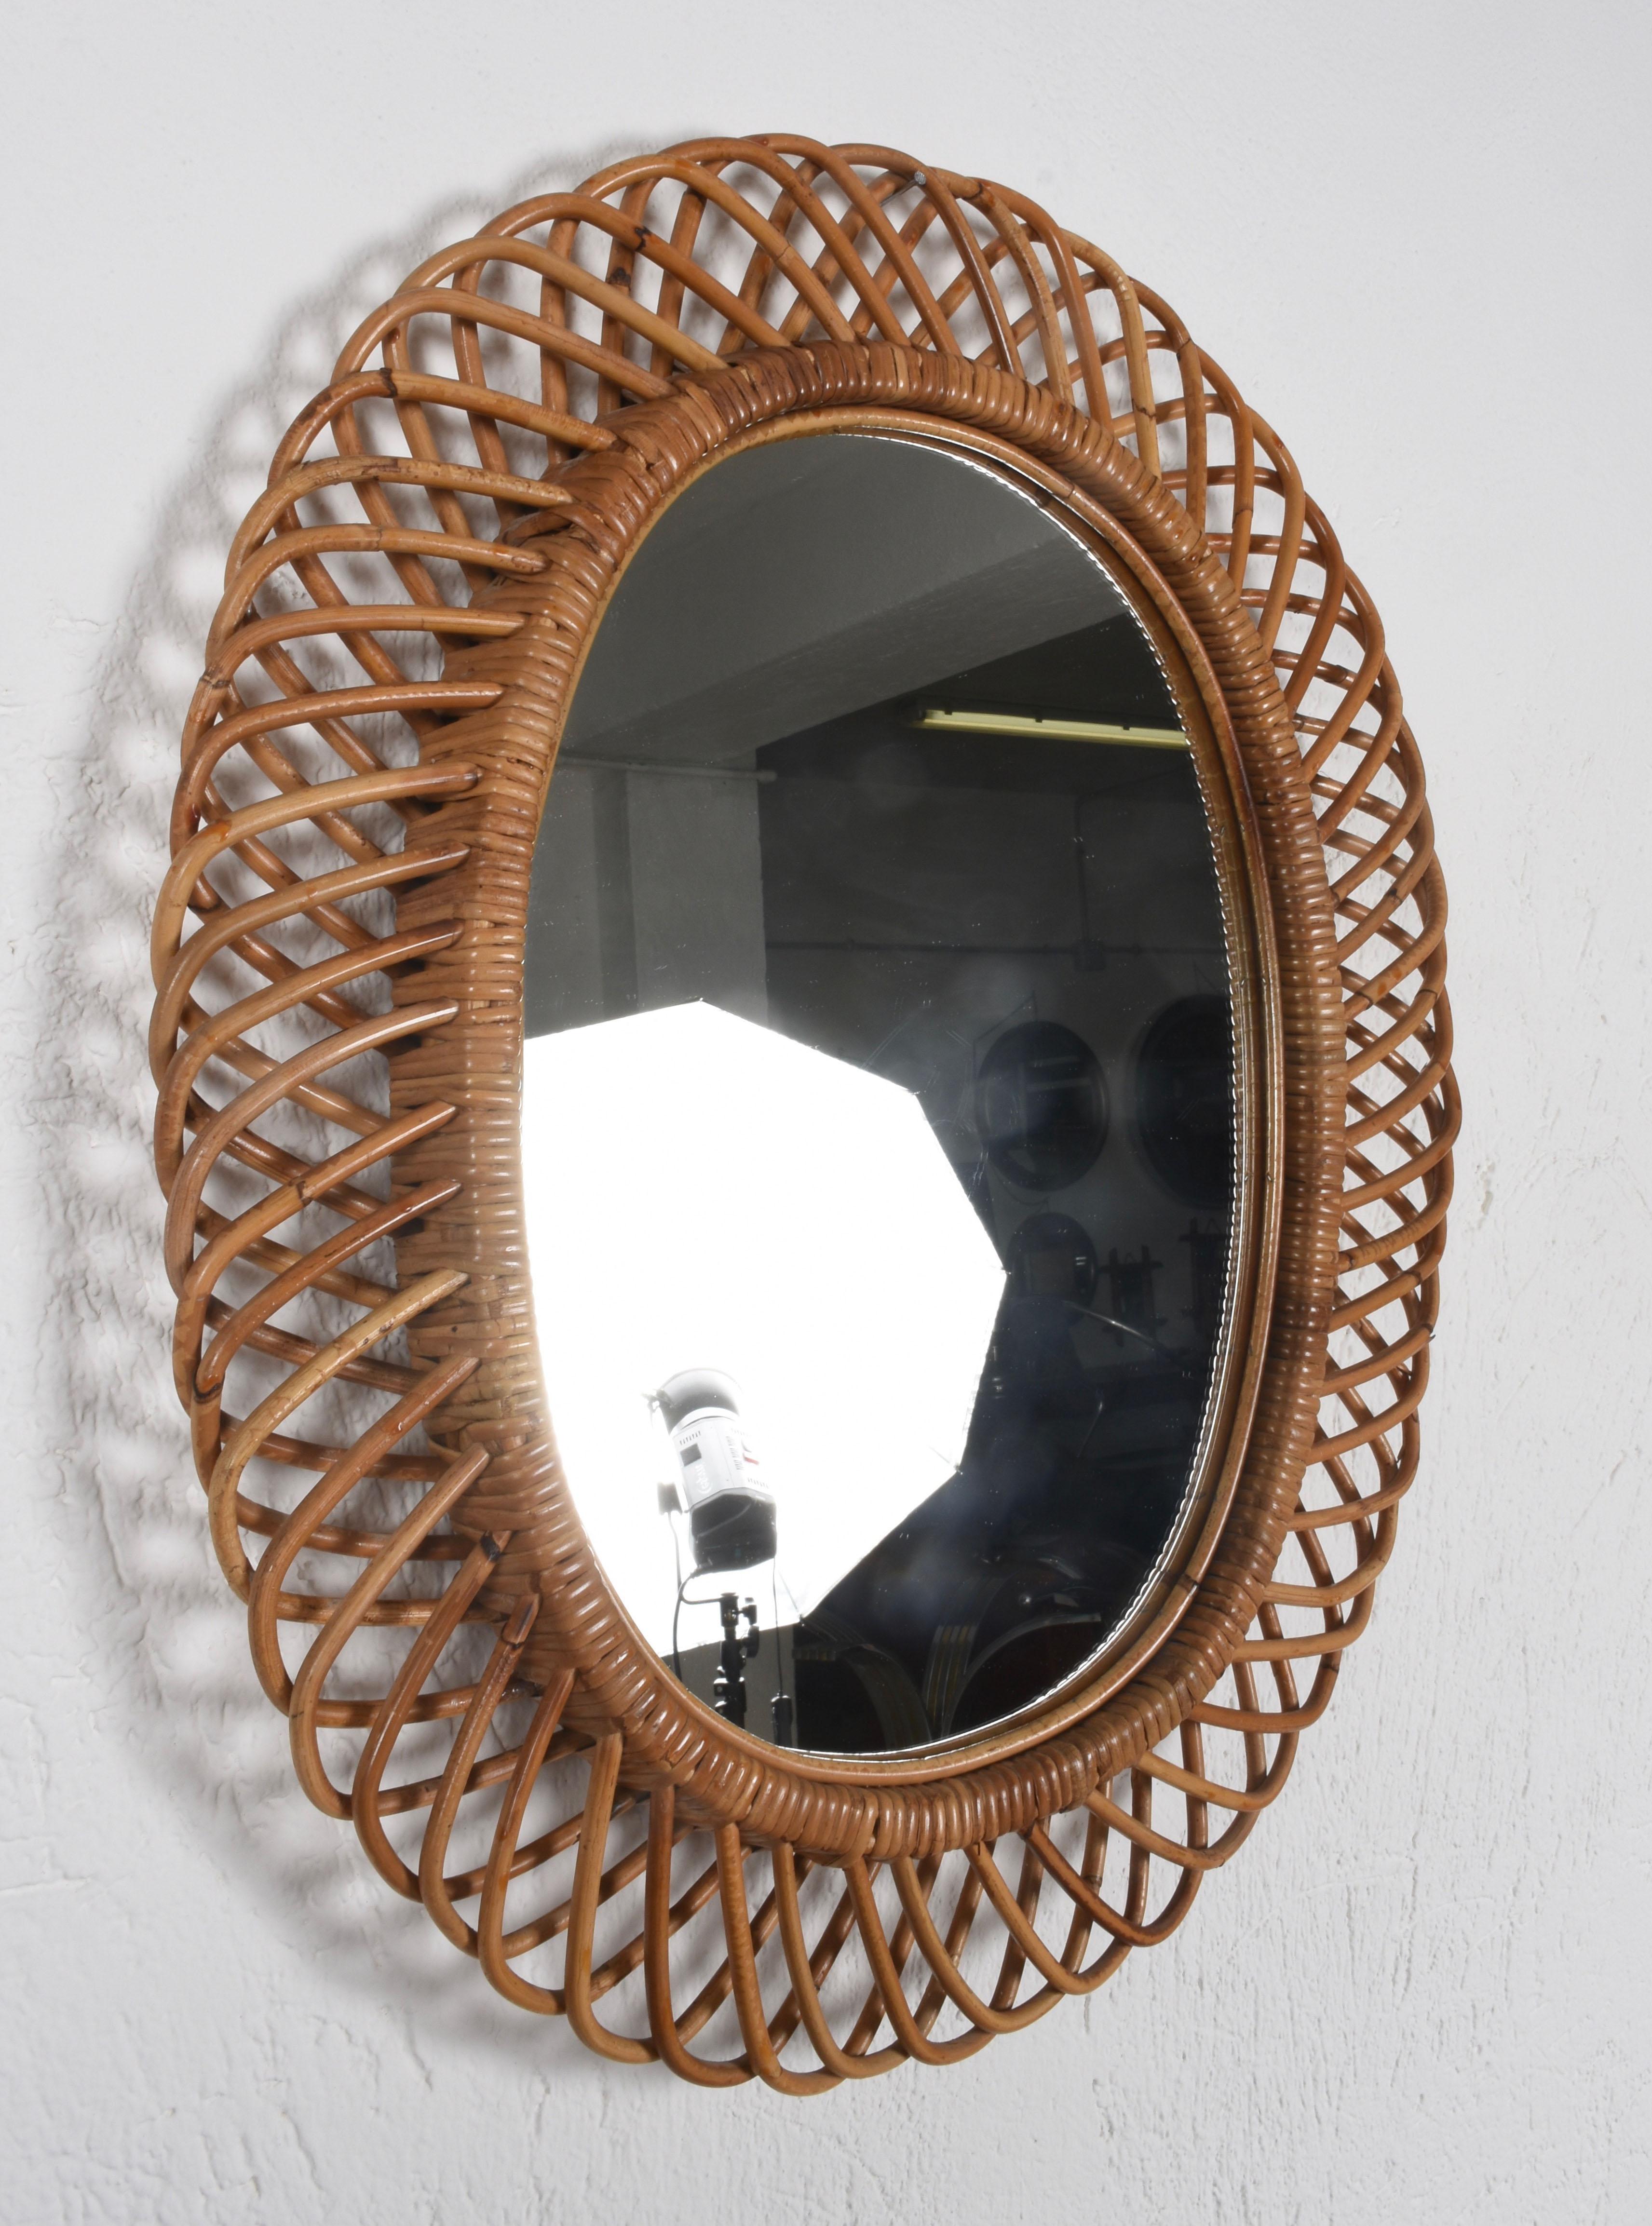 Very decorative oval mirror with curved rattan beams and bamboo frame attributed to Franco Albini, Italy, 1960s. Measurements: 75 x 63 cm.